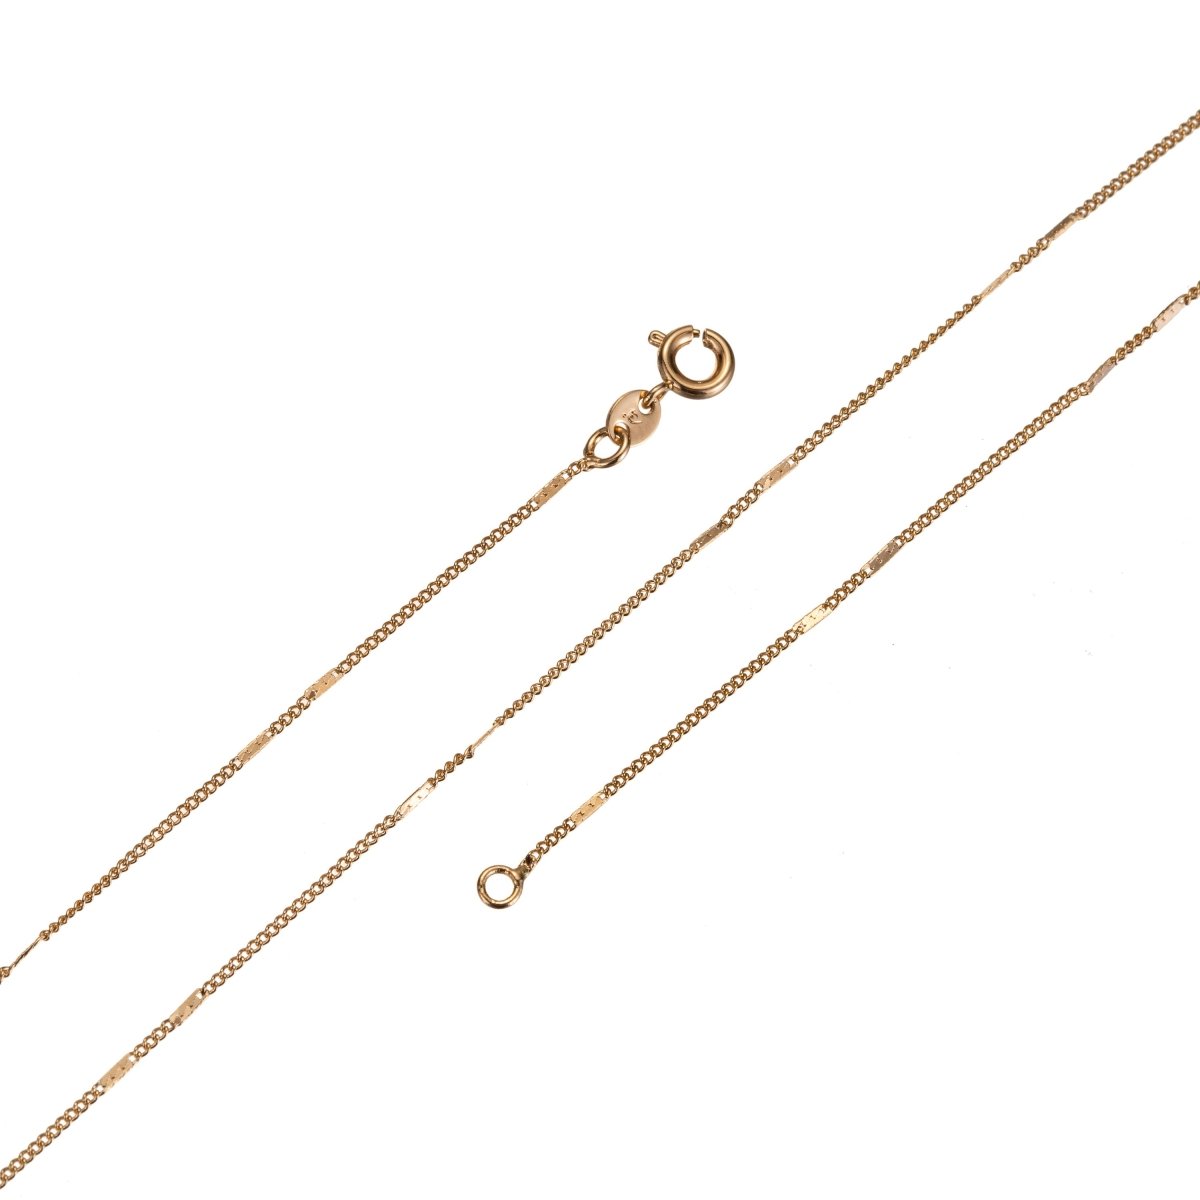 3mm Criss Cross Chain Necklace, 18K Gold Plated Finished Chain Necklace Ready to Wear 17.7 Inch Gold Chain w/ Spring Ring | CN-654 Clearance Pricing - DLUXCA